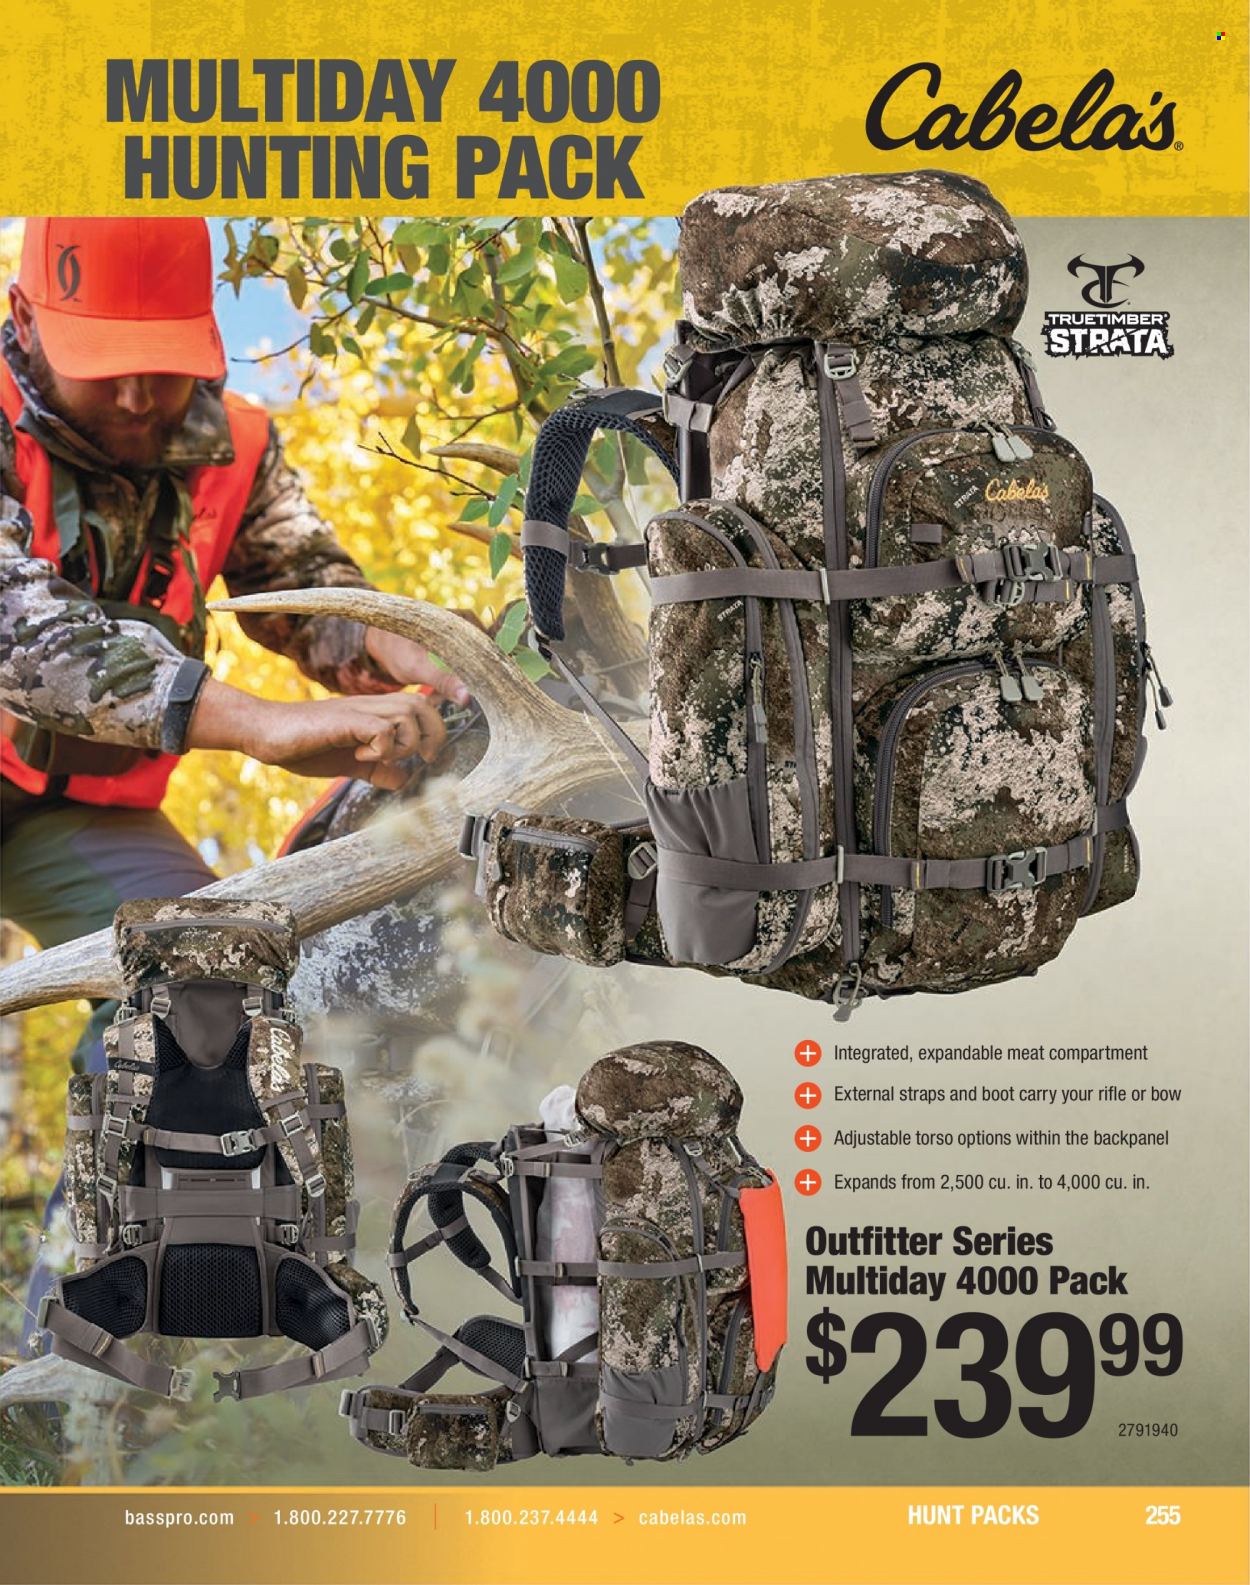 Bass Pro Shops flyer . Page 255.